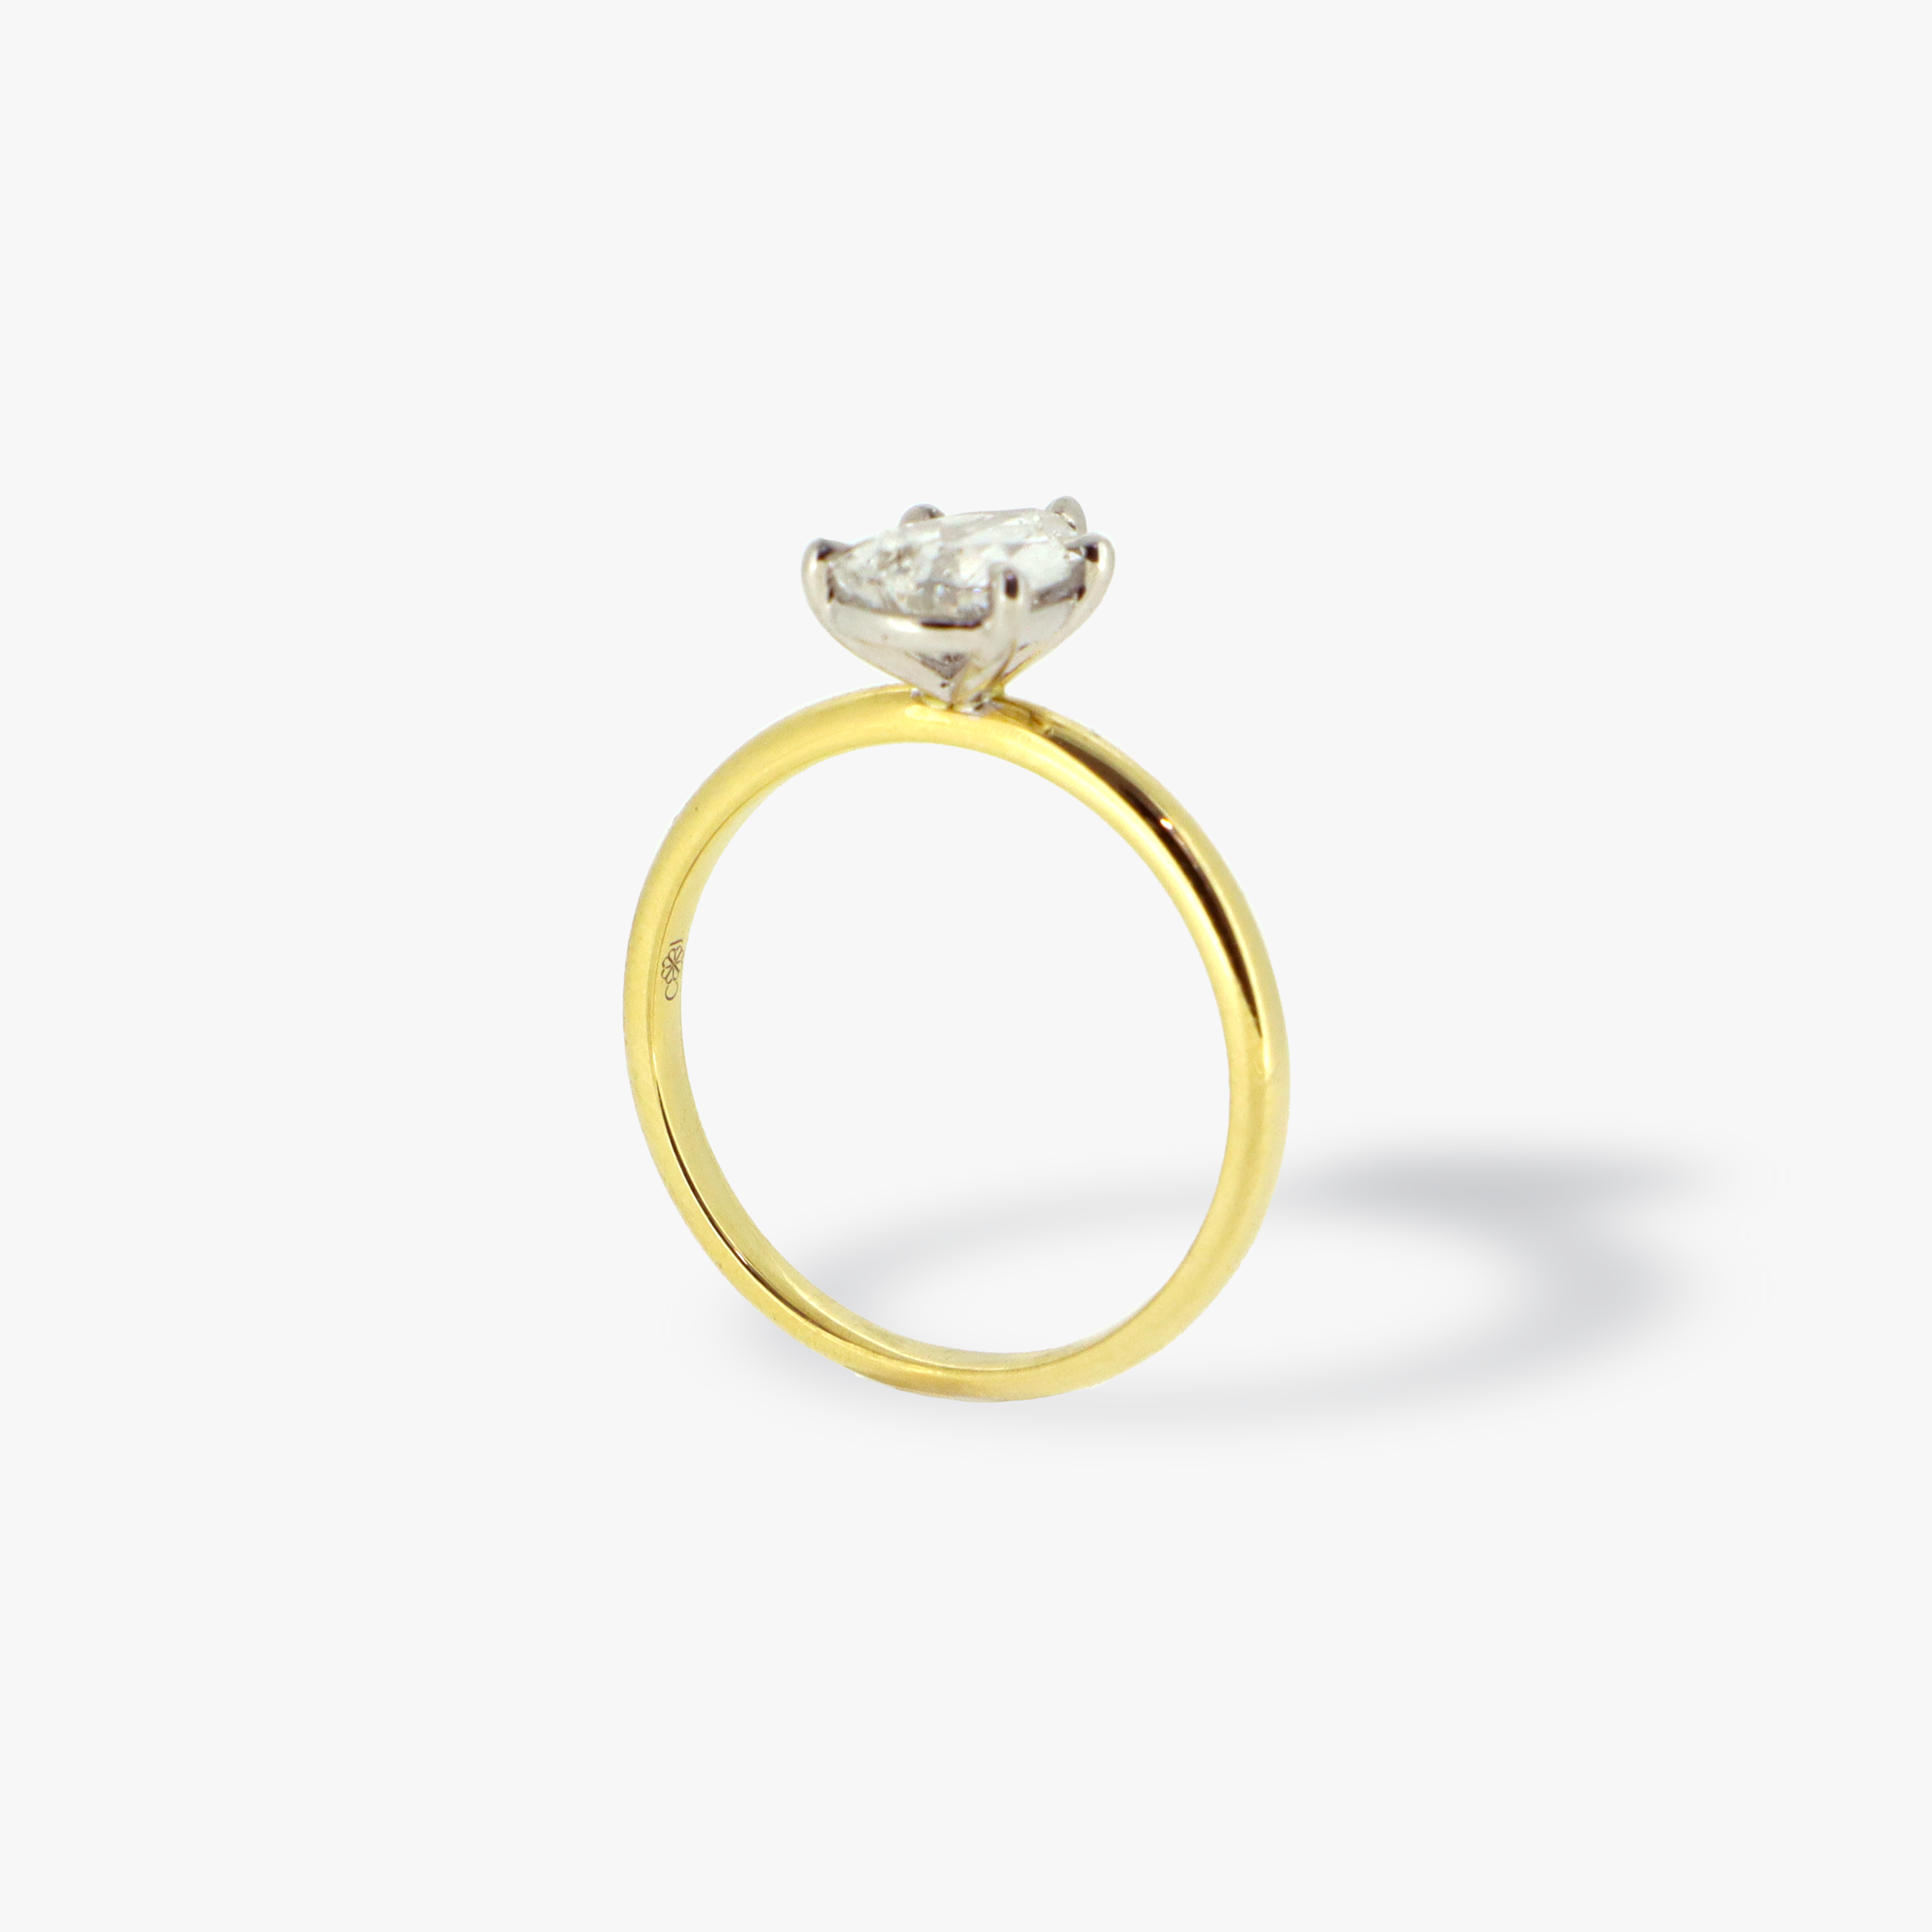 PAIGE | 1.05CT PEAR CUT SOLITAIRE ENGAGEMENT RING